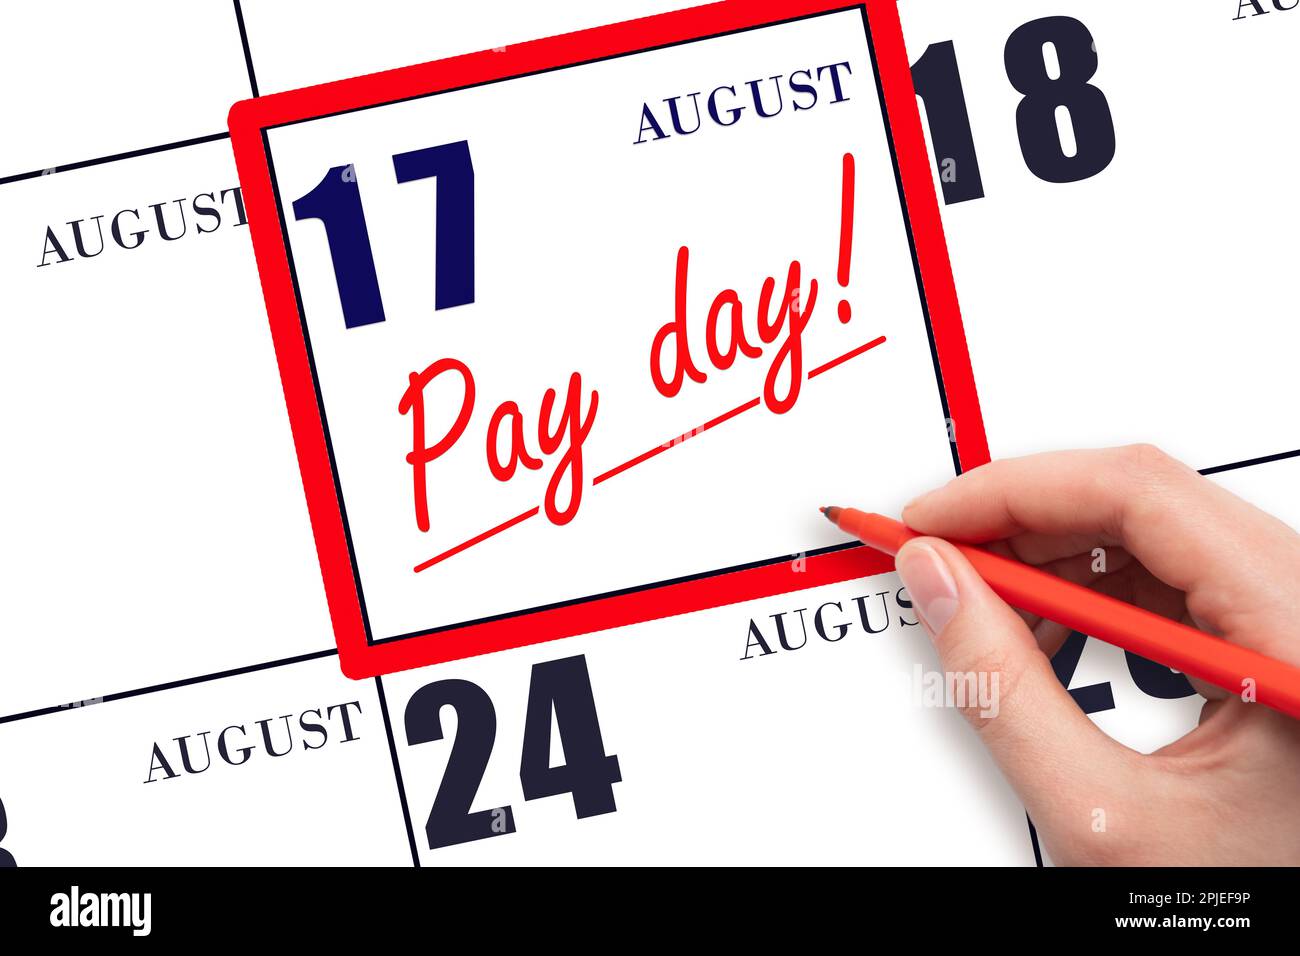 17th day of August. Hand writing text PAY DATE on calendar date August 17 and underline it. Payment due date. Reminder concept of payment. Summer mont Stock Photo